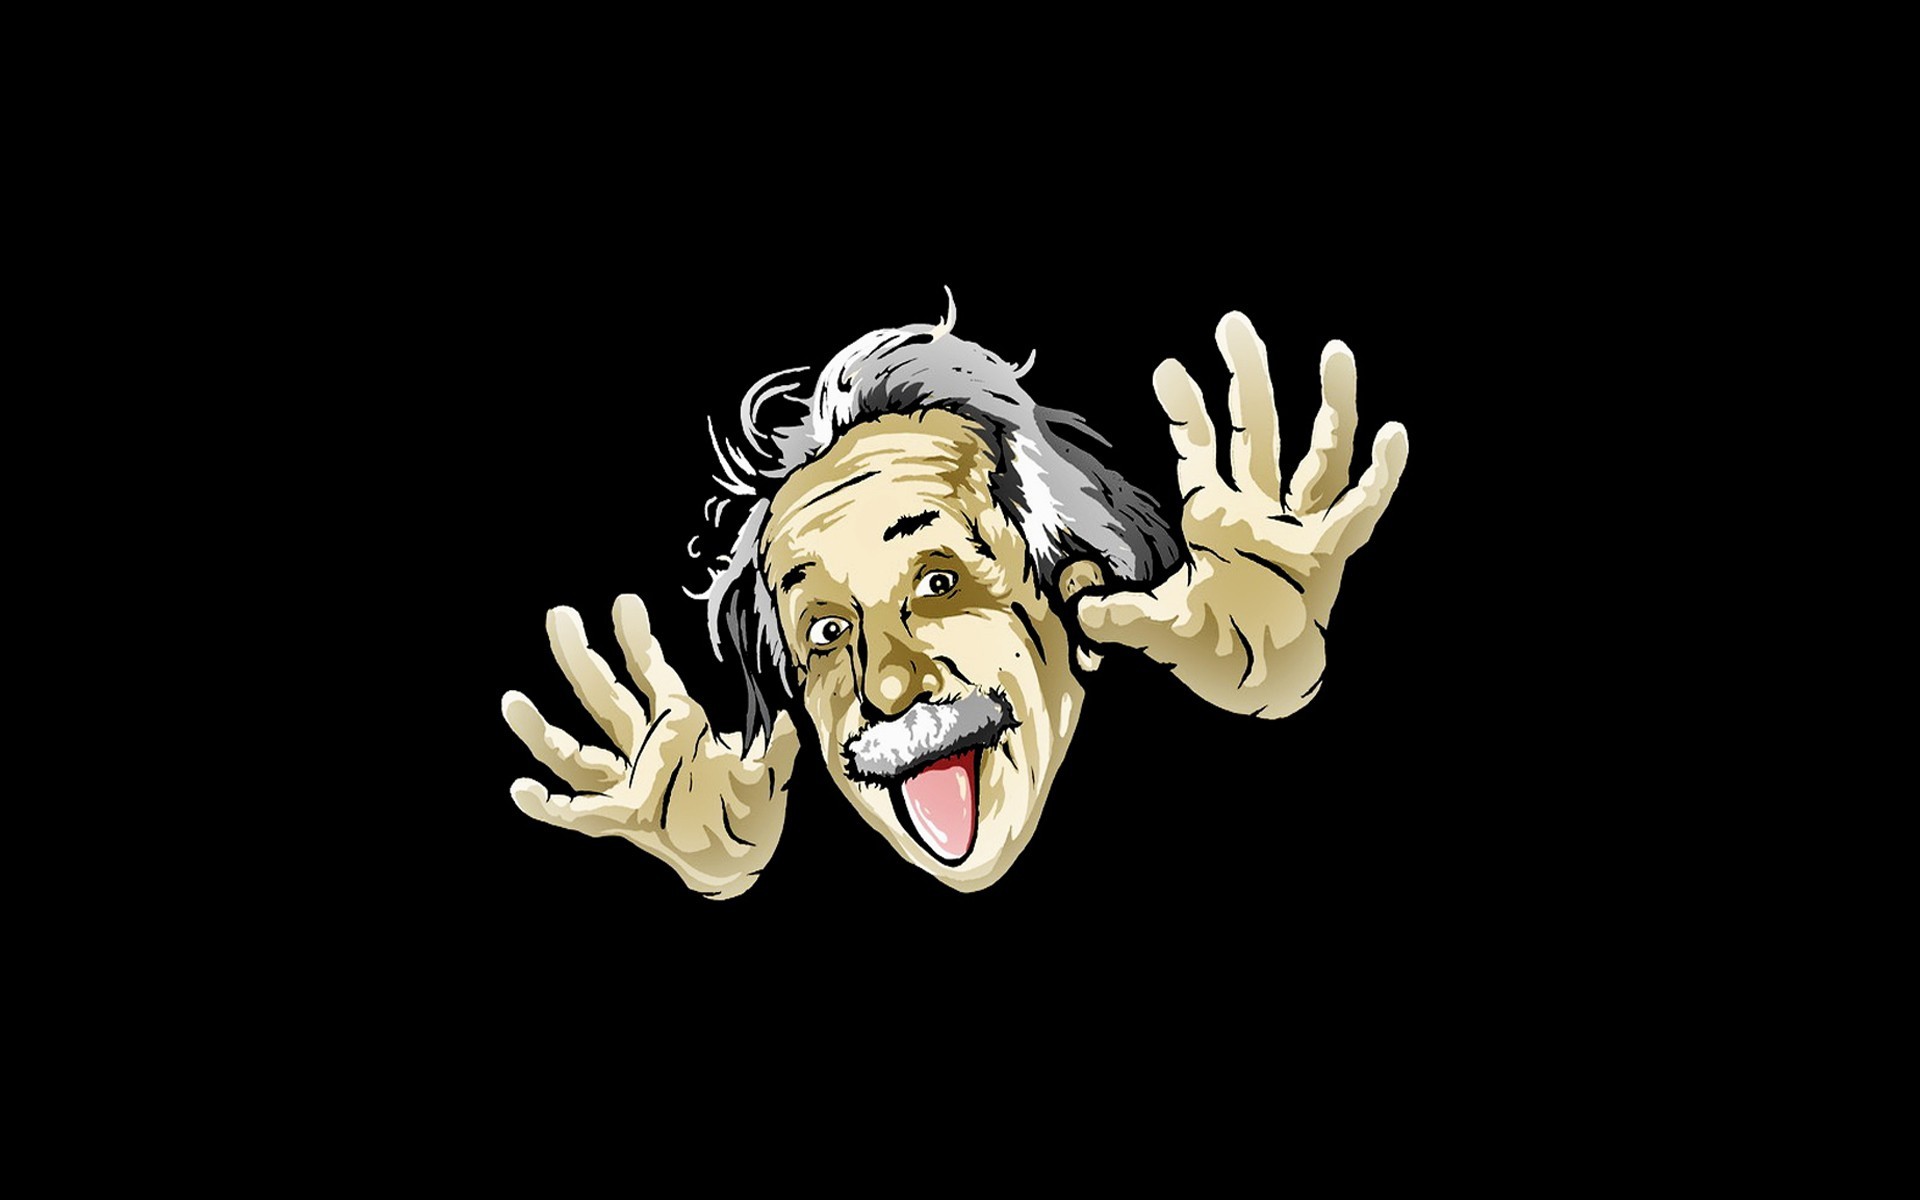 General 1920x1200 Albert Einstein men tongue out hands artwork simple background black background tongues